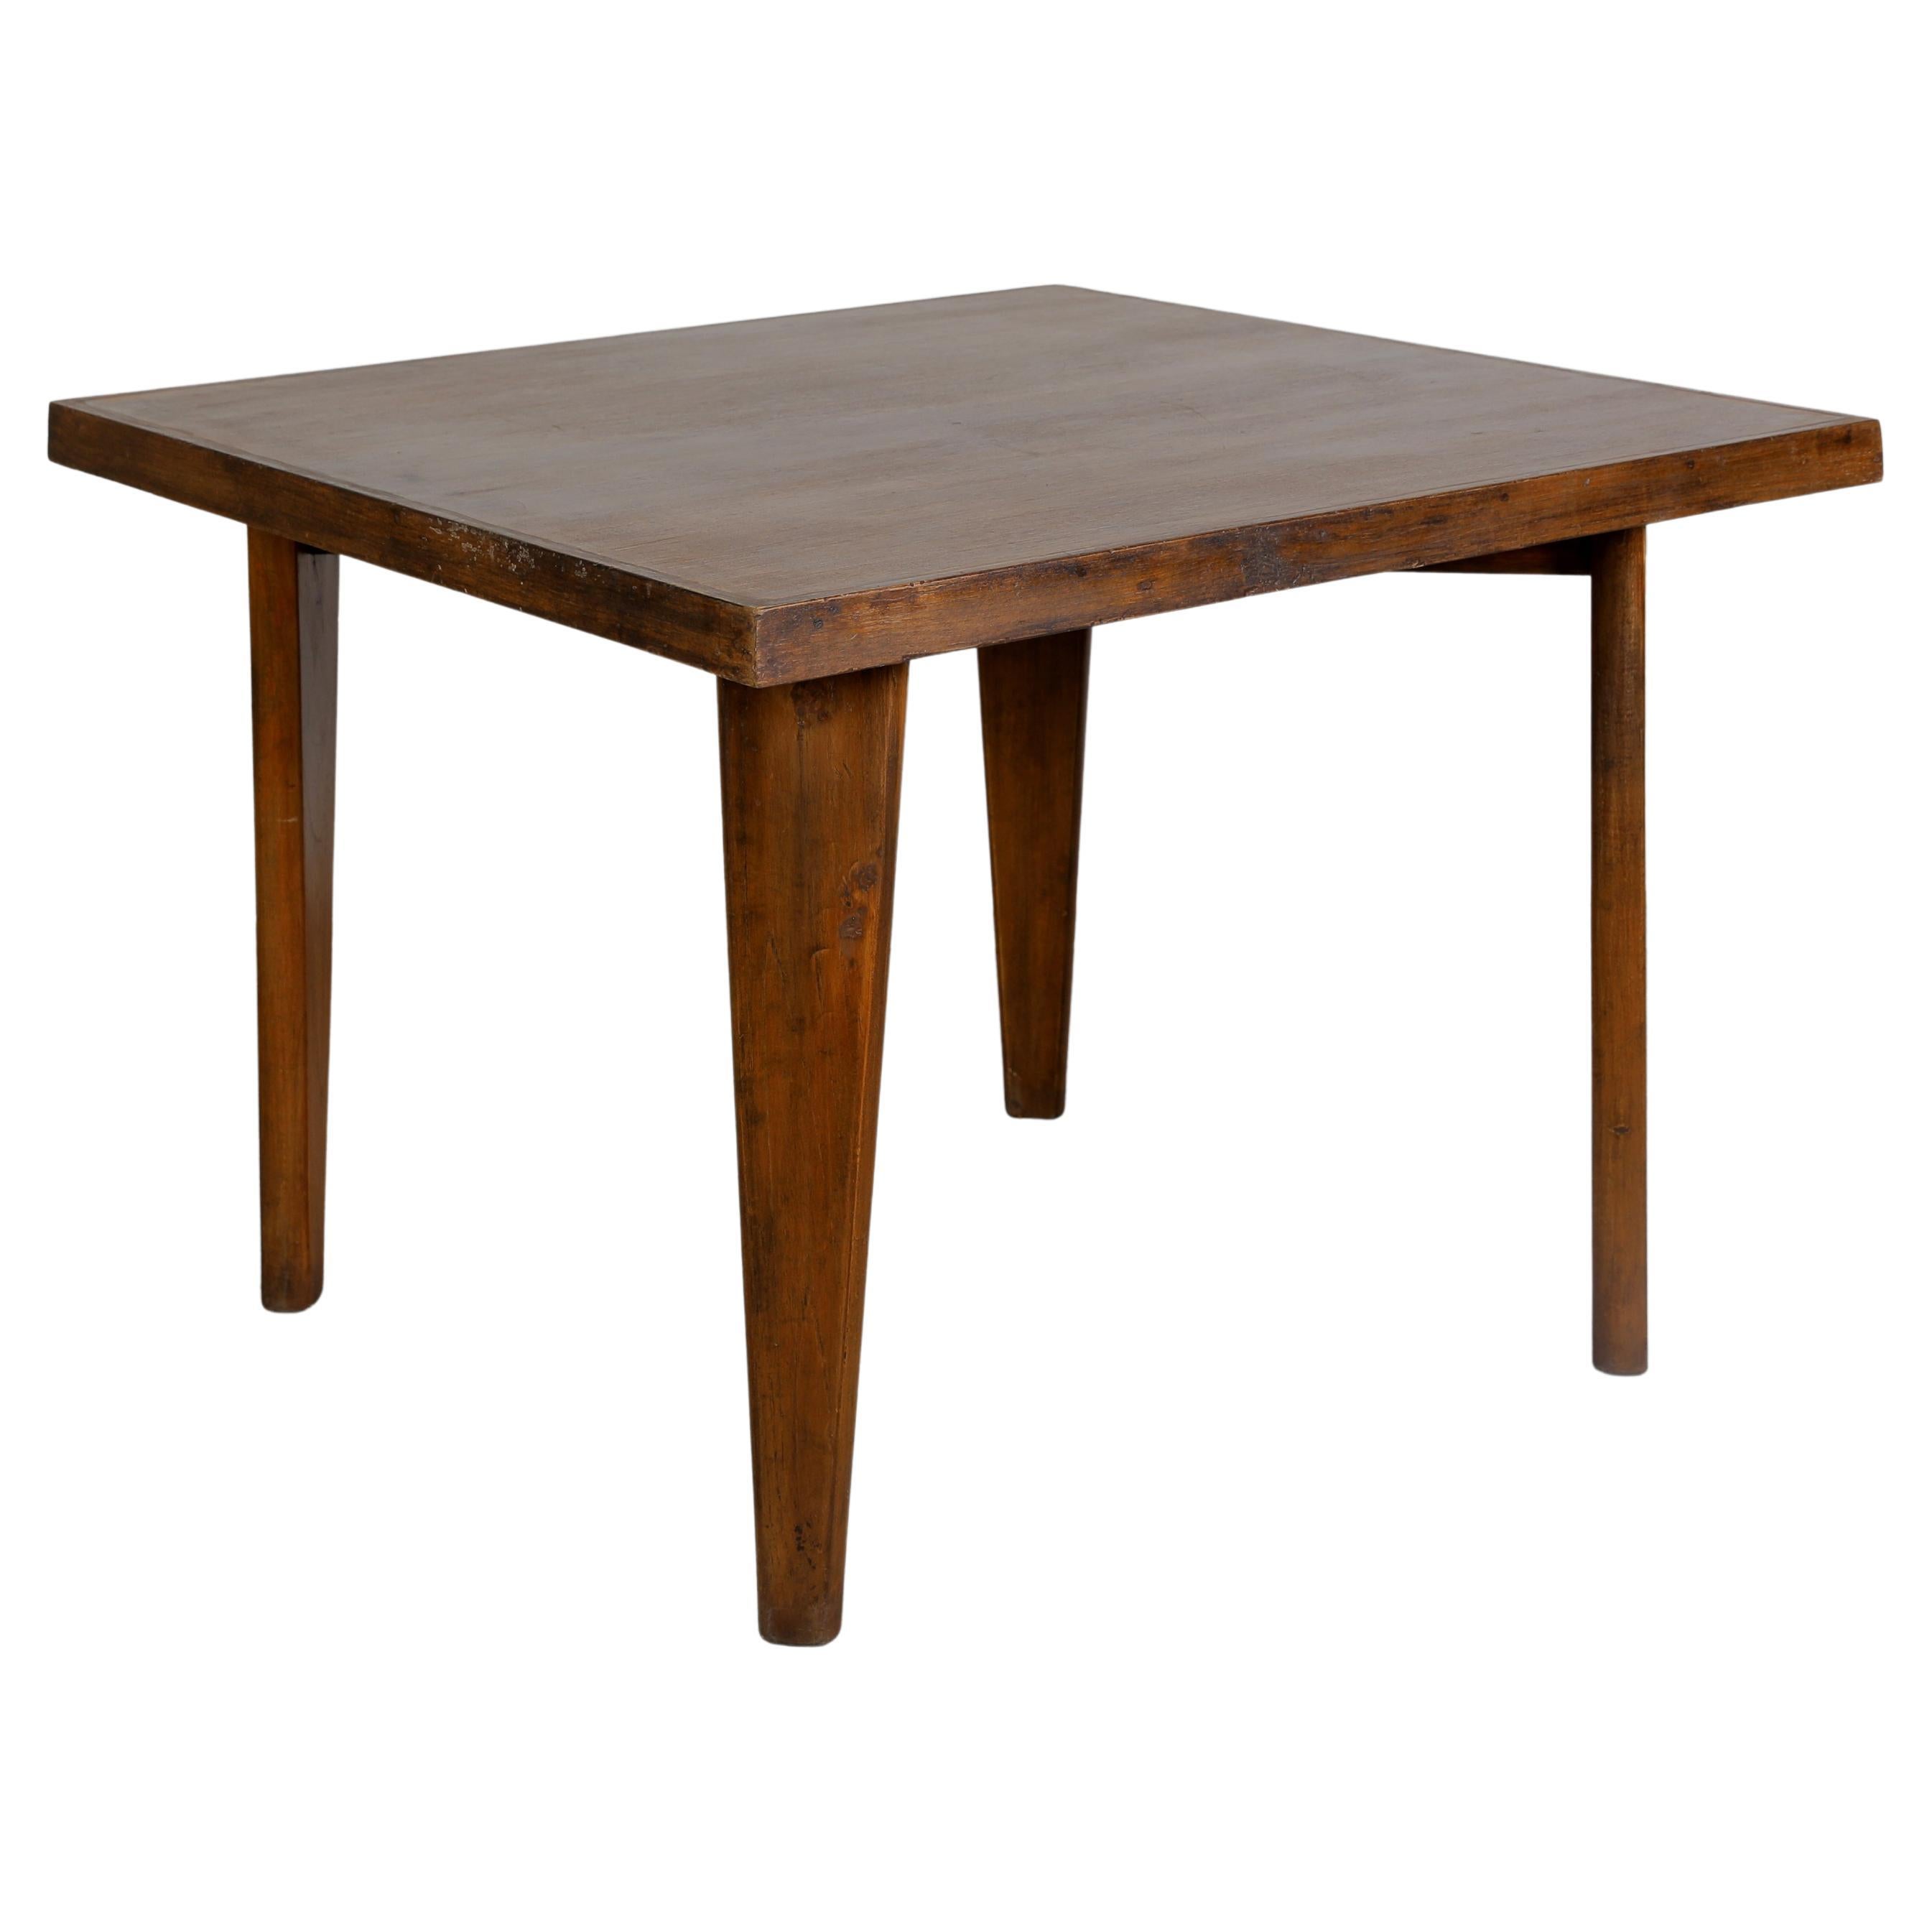 Pierre Jeanneret PJ-TA-04-A Square Table / Authentic Mid-Century Chandigarh For Sale